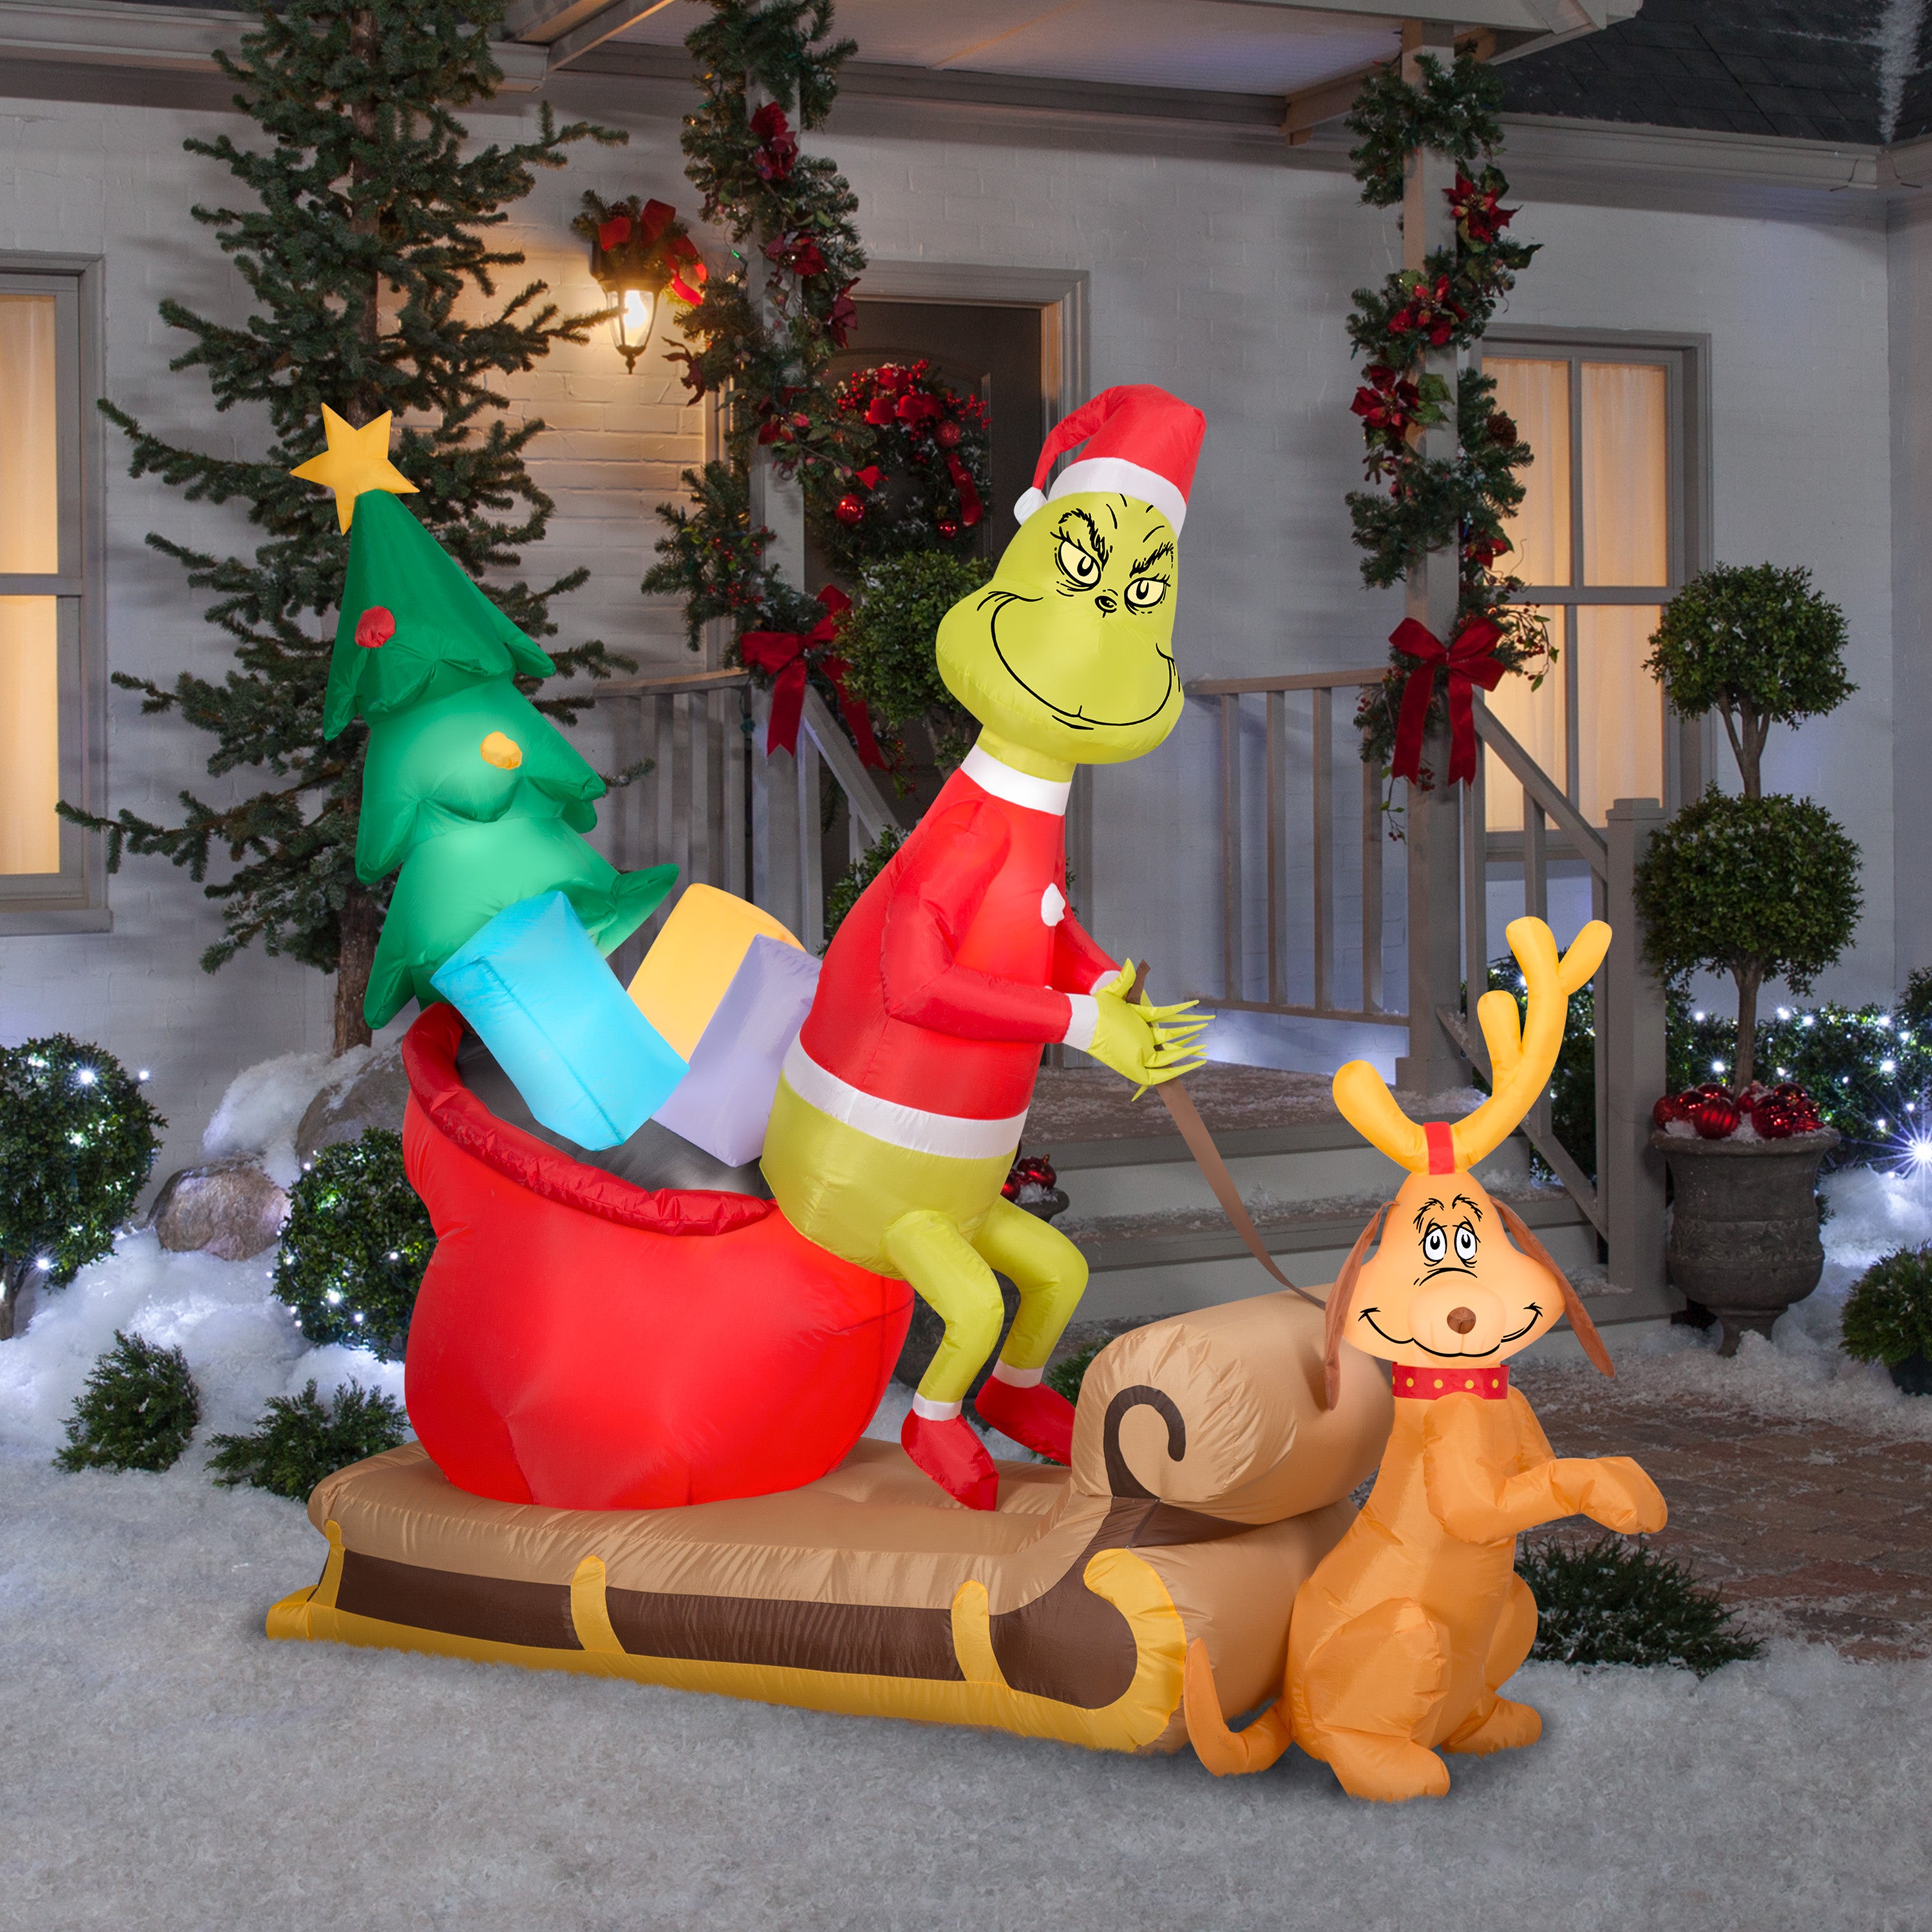 Gemmy Christmas Airblown Inflatable Grinch and Max w/Sleigh Scene Dr. Seuss, 5.5 ft Tall, Brown